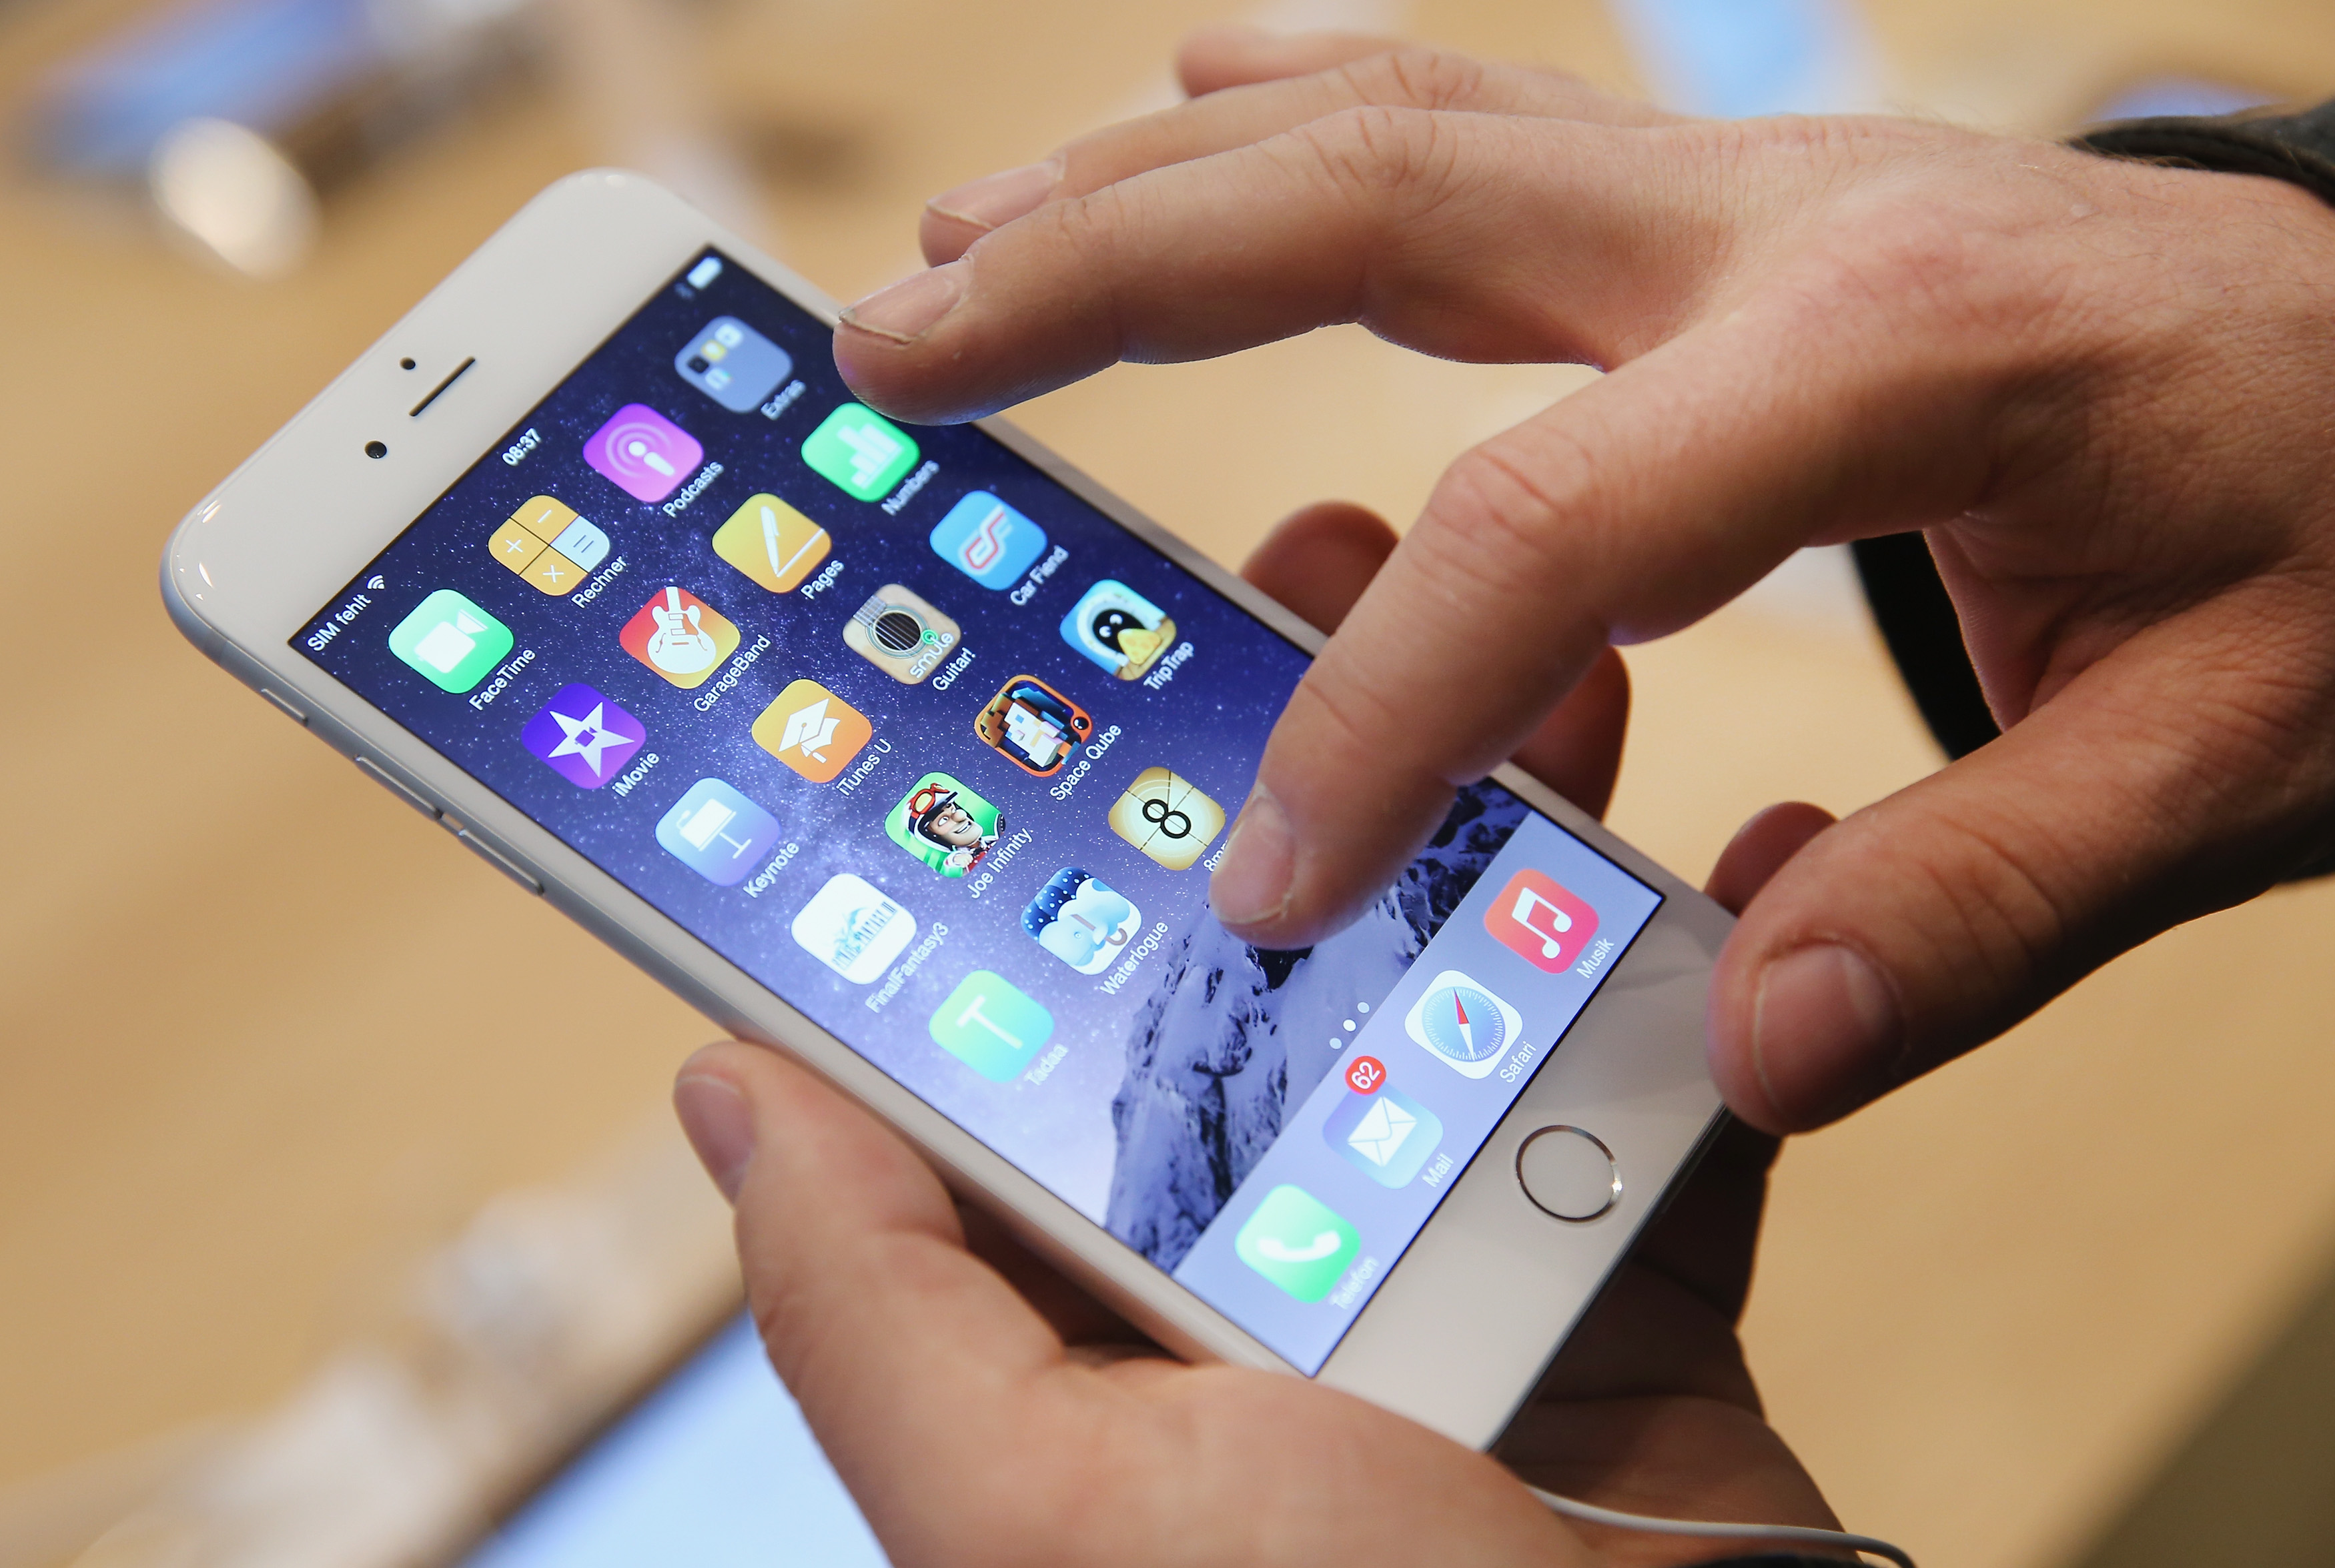 A shopper ltries out the new Apple iPhone 6 at the Apple Store on the first day of sales of the new phone in Germany on September 19, 2014 in Berlin, Germany. (Sean Gallup—Getty Images)